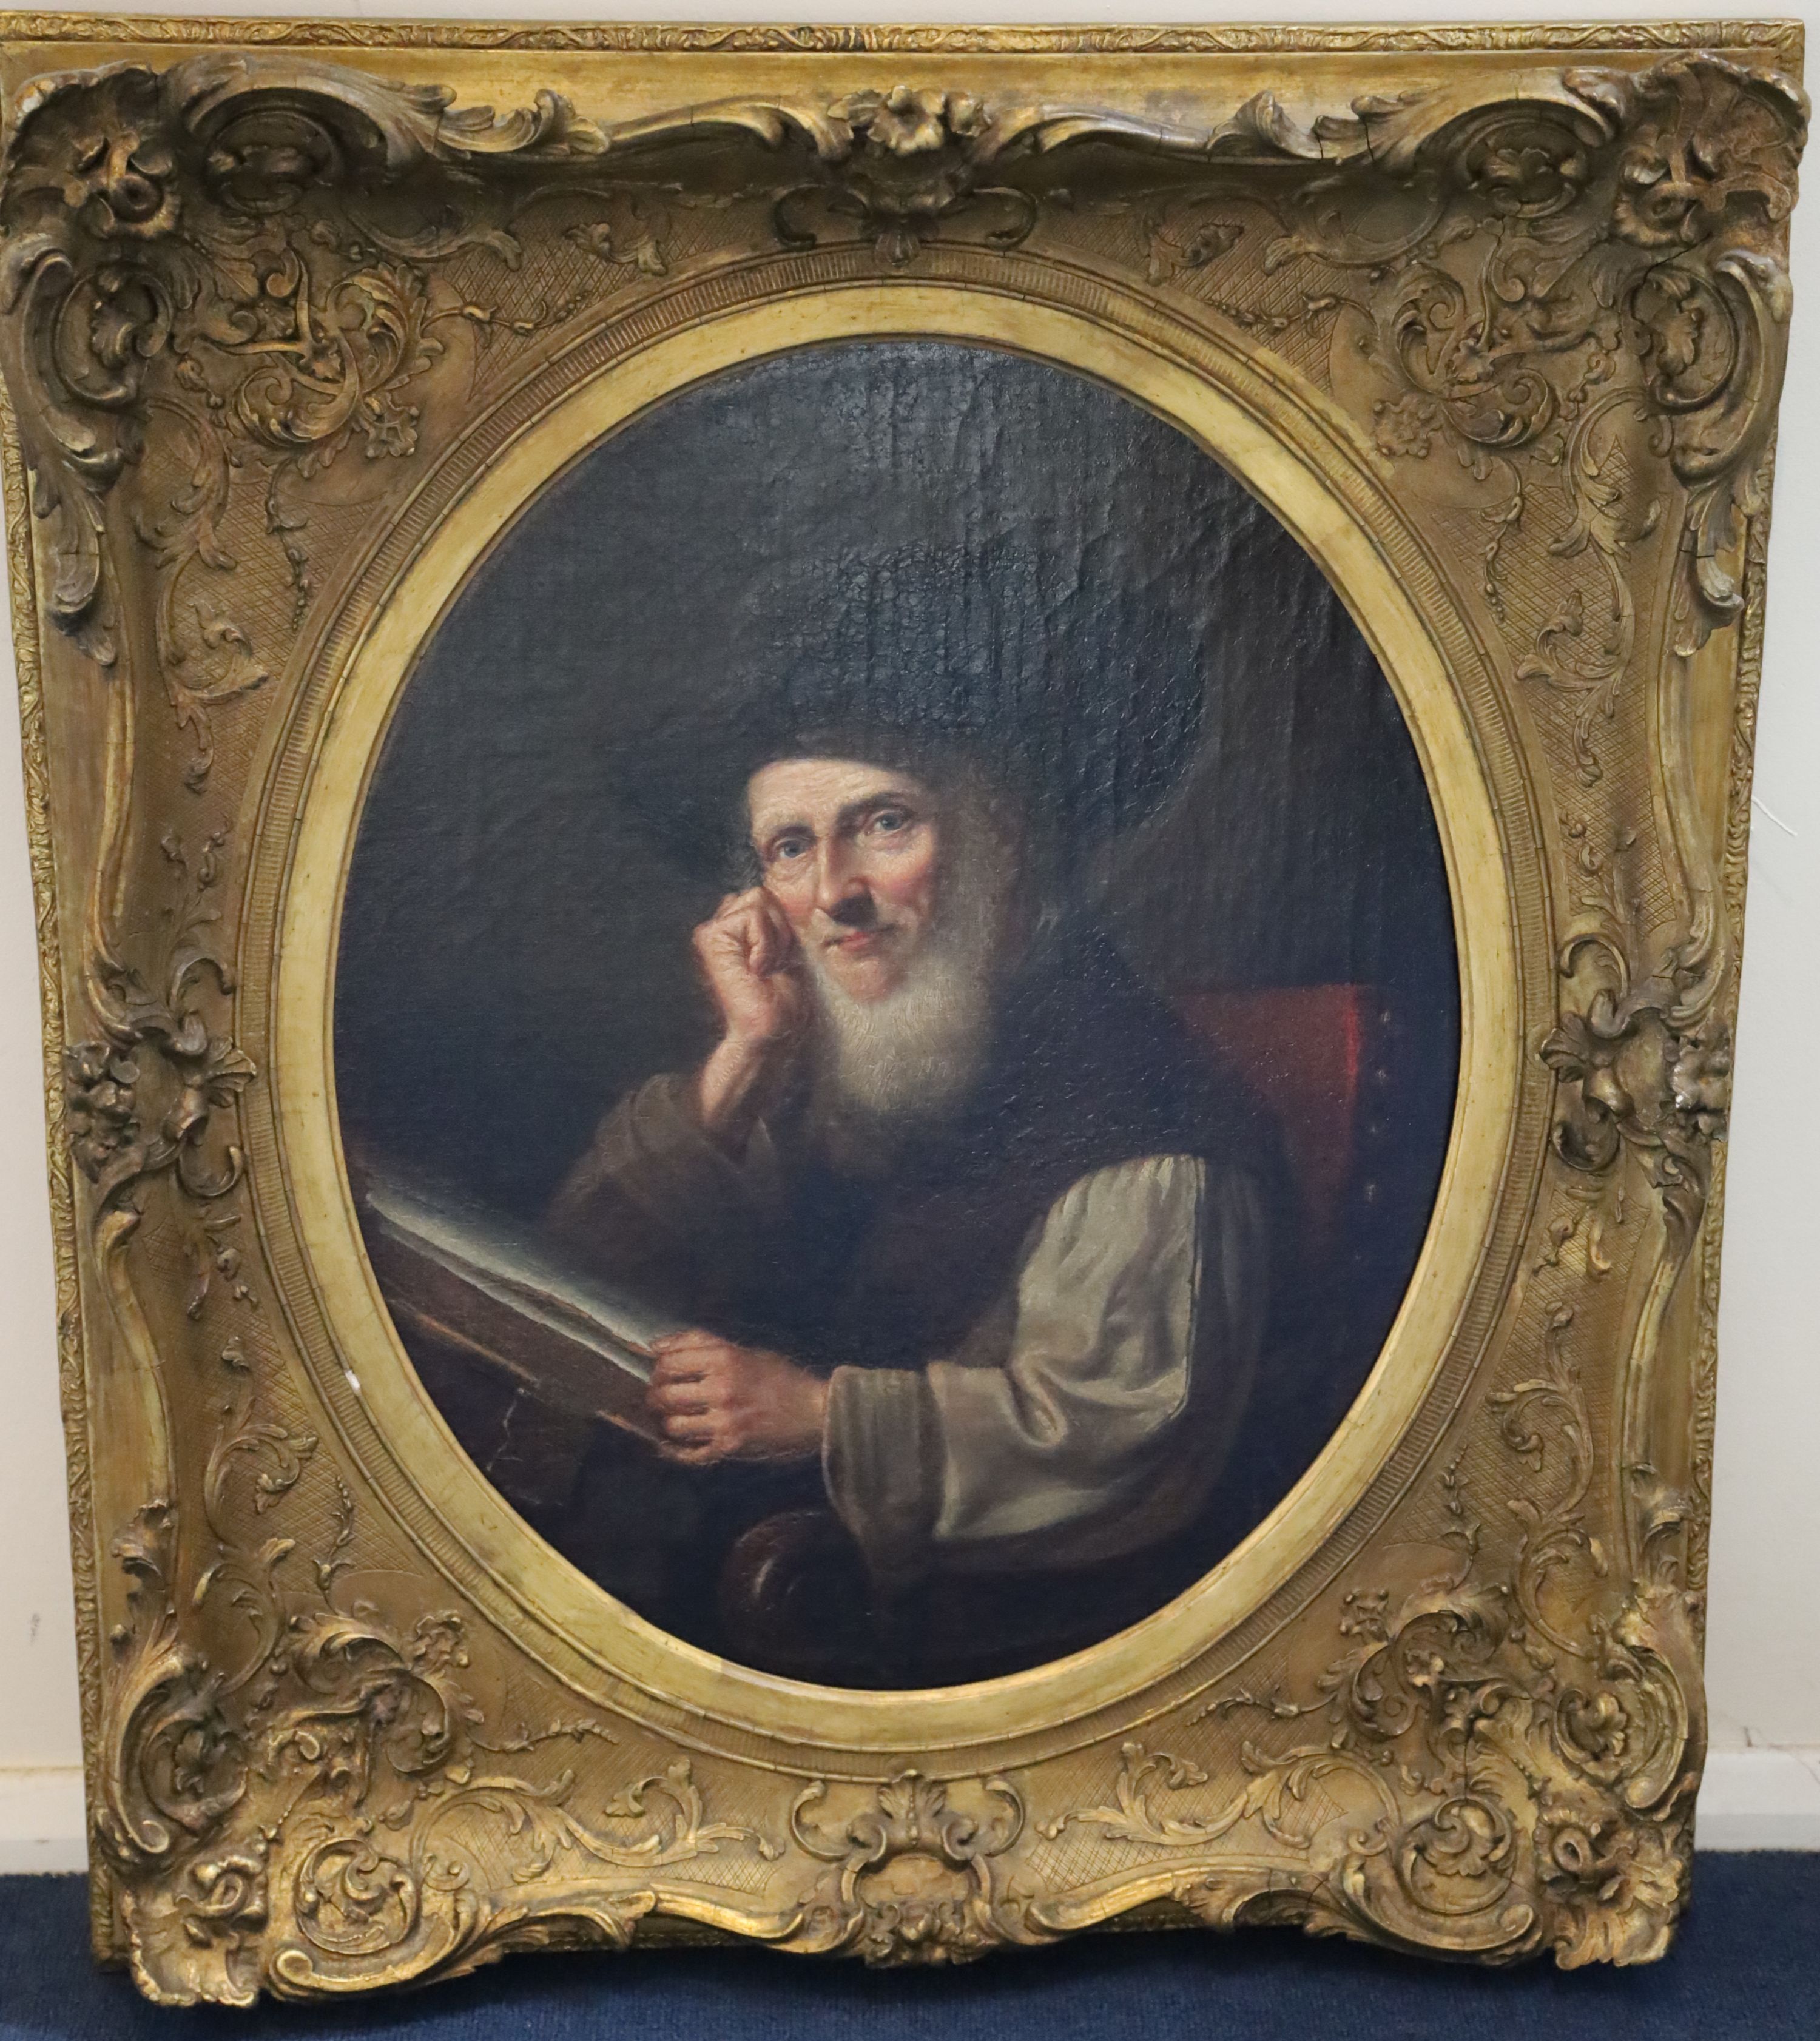 19th century Flemish School , Portrait of a 17th century gentleman seated reading a book, oil on canvas, 56 x 45.75cm., framed to the oval